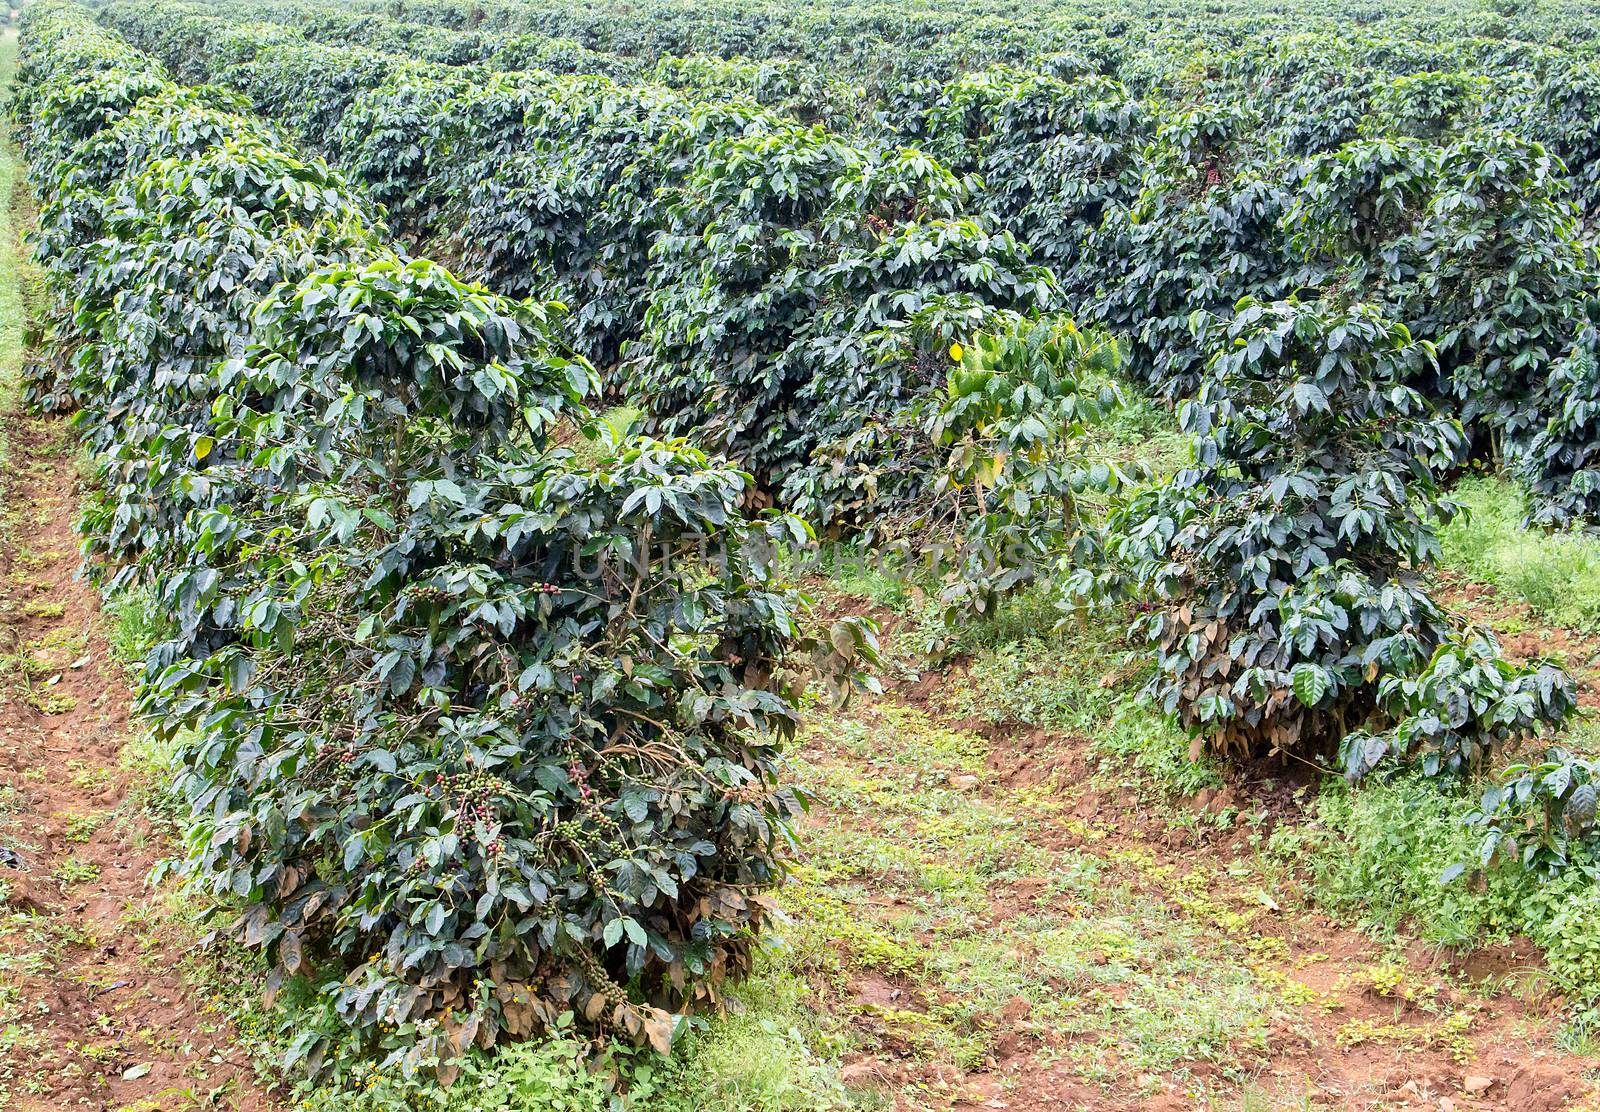 Coffee bushes in organic plantation by Theeraphon